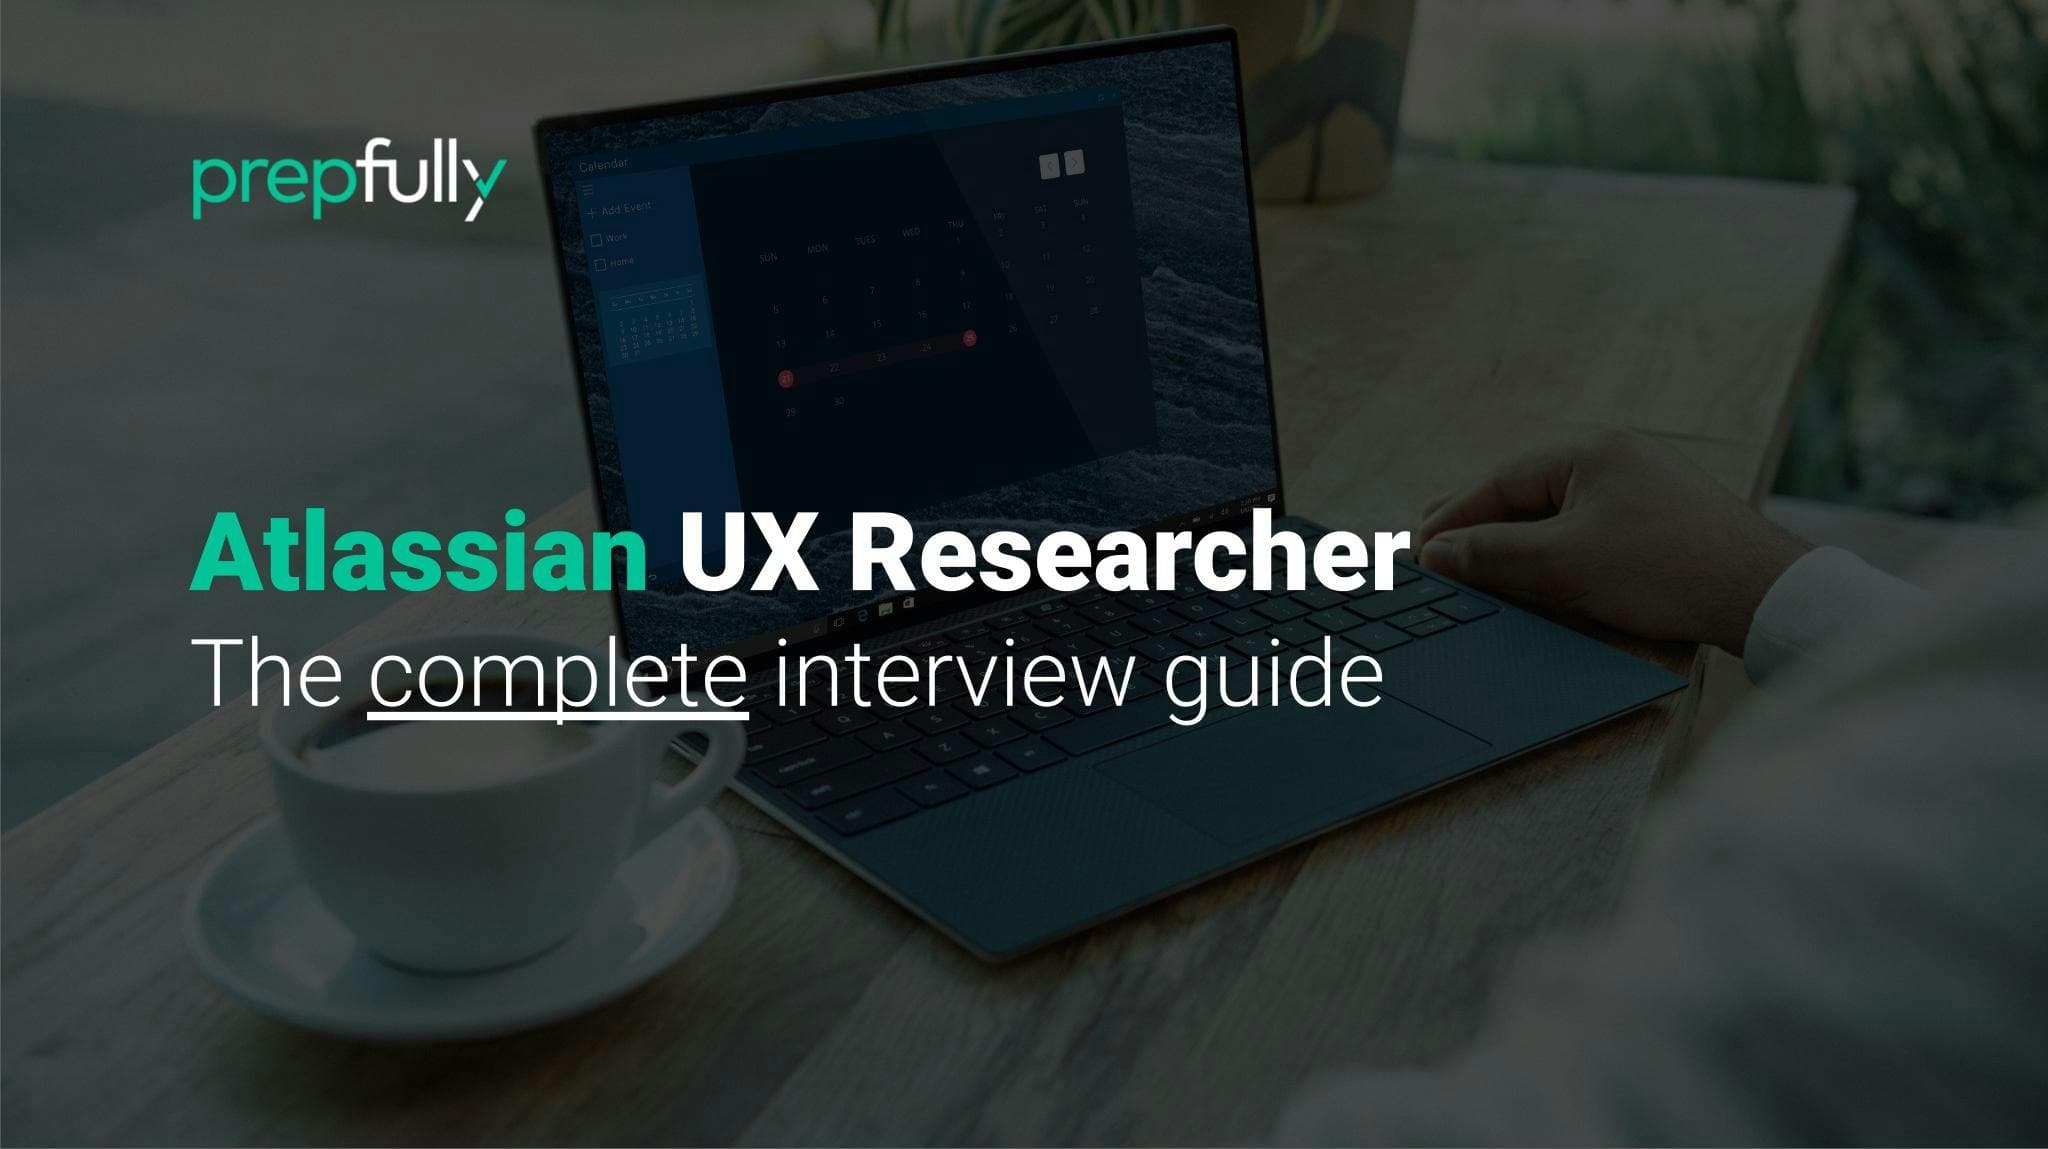 Interview guide for Atlassian UX Researcher